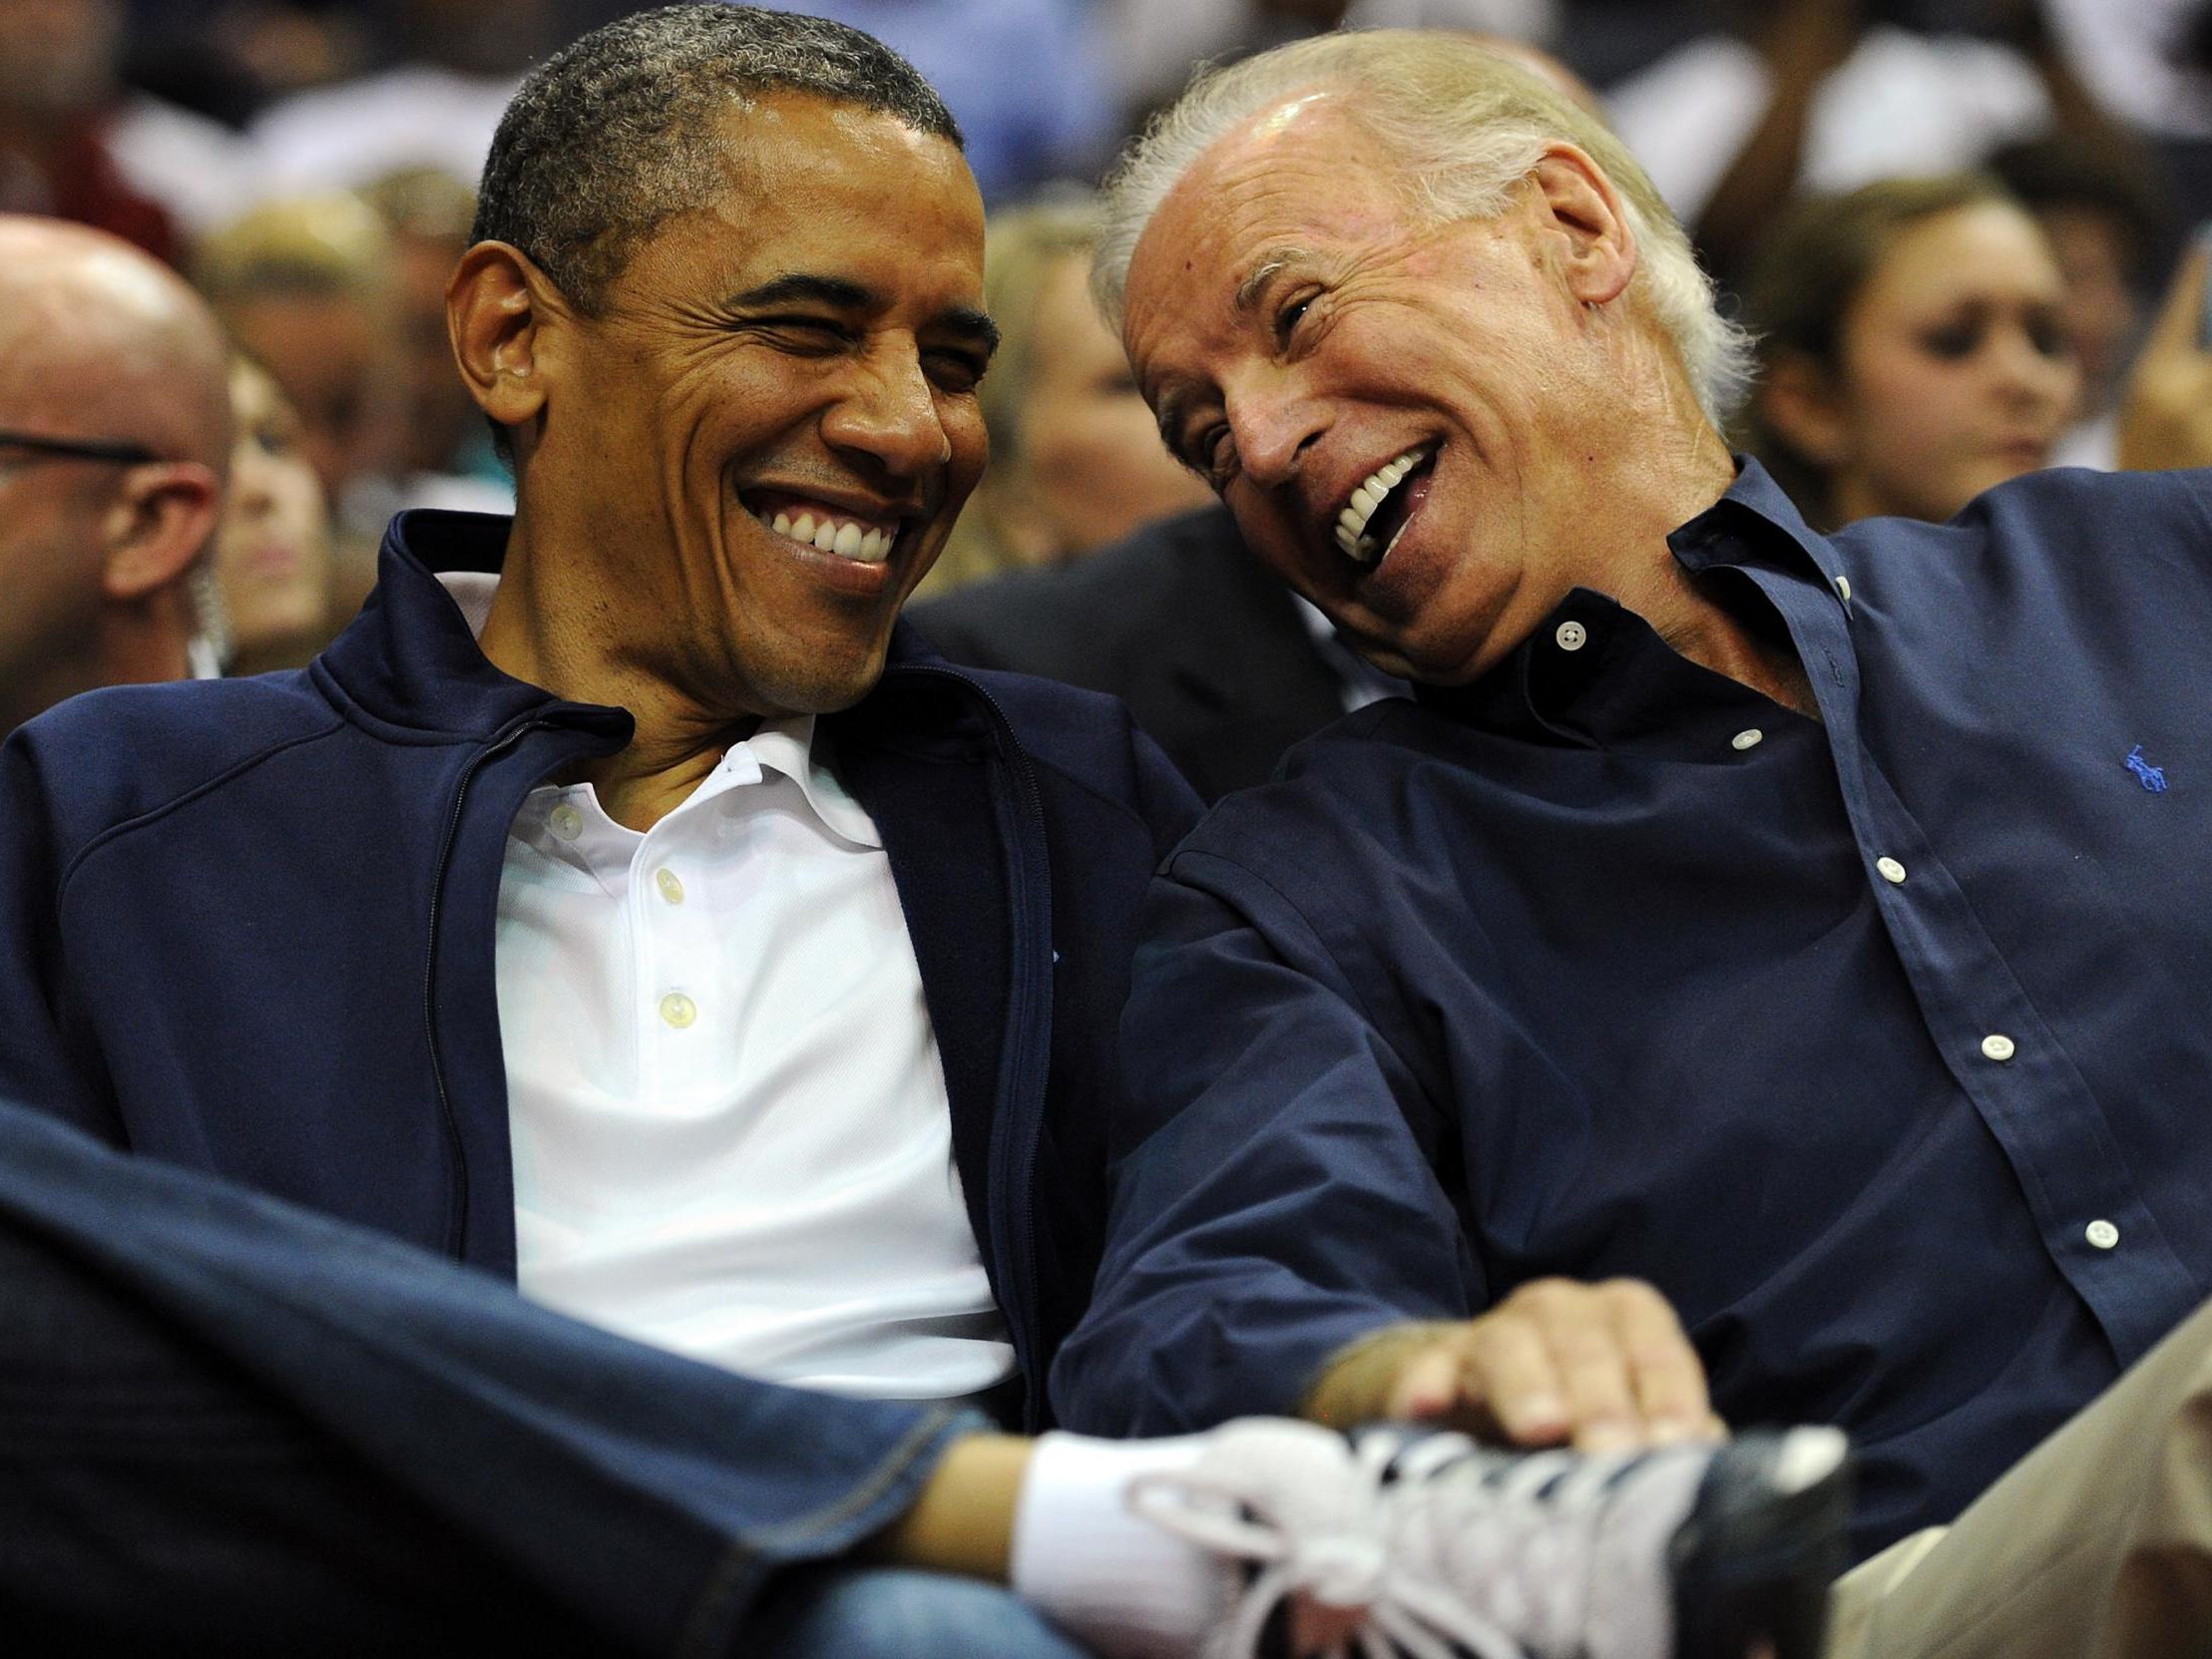 President Barack Obama and then vice president Joe Biden share a laugh as the US Senior Men's National Team and Brazil play during a pre-Olympic exhibition basketball game at the Verizon Center on 16 July 2012 in Washington DC